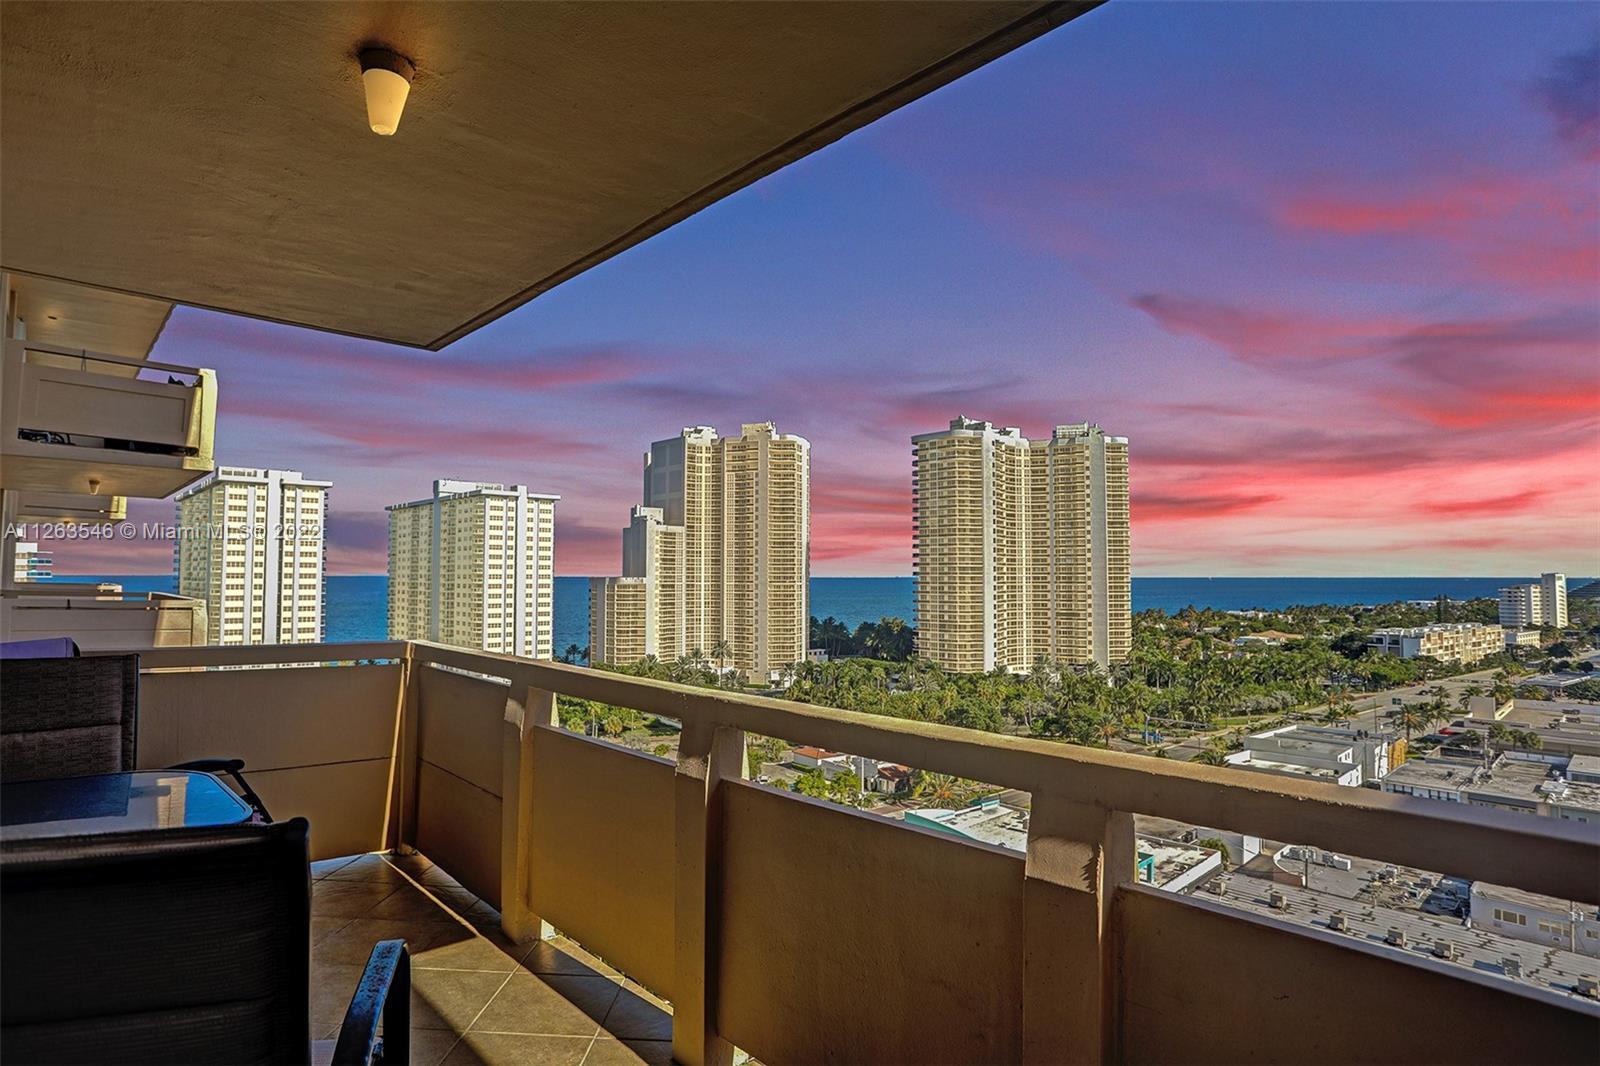 Rarely Available! Breathtaking views of the ocean, city & sunsets from every window of this 16th flo